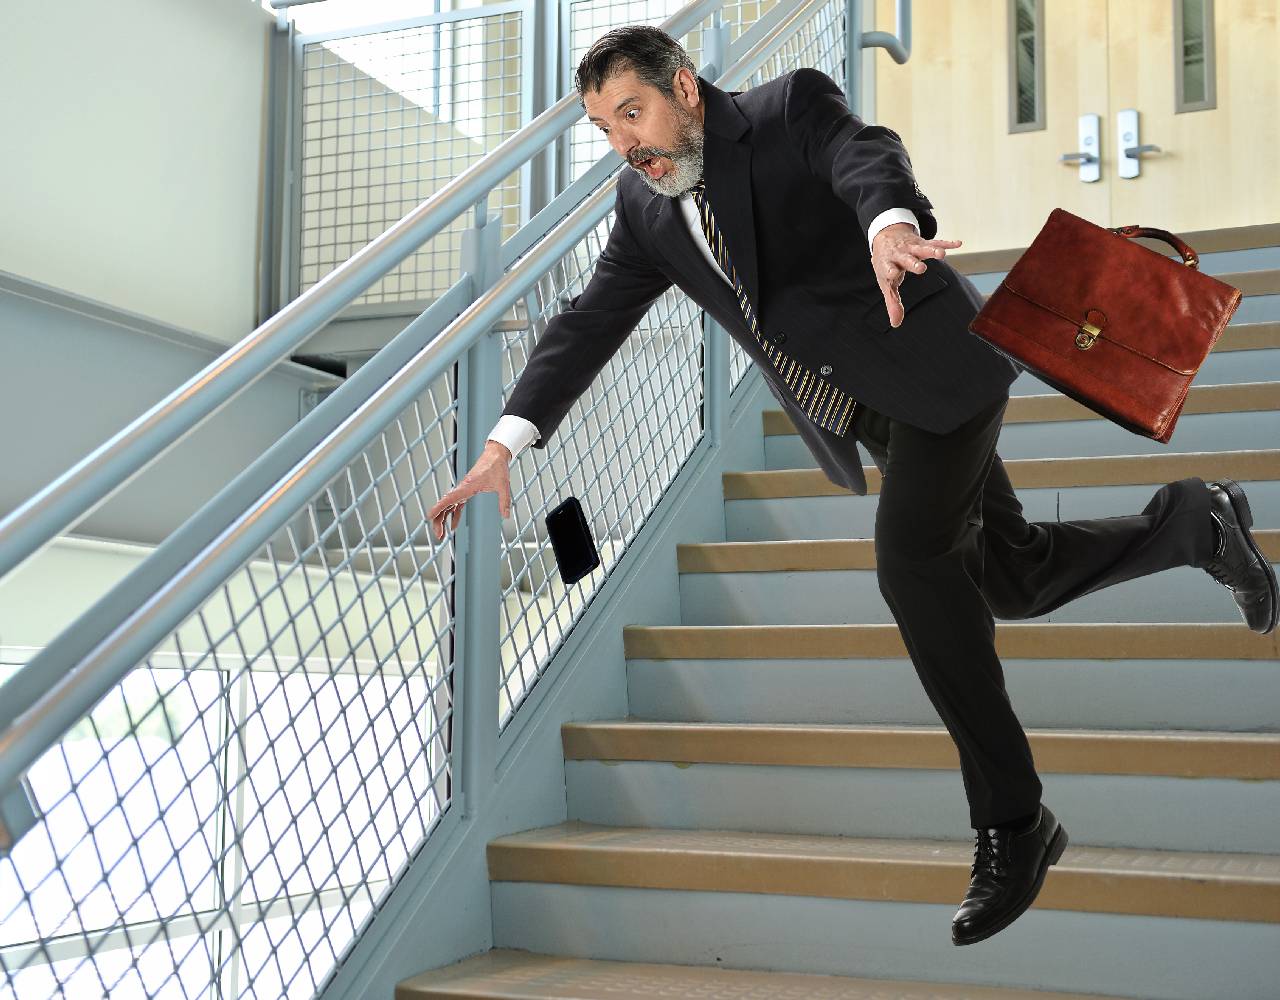 common causes of slip and fall accidents